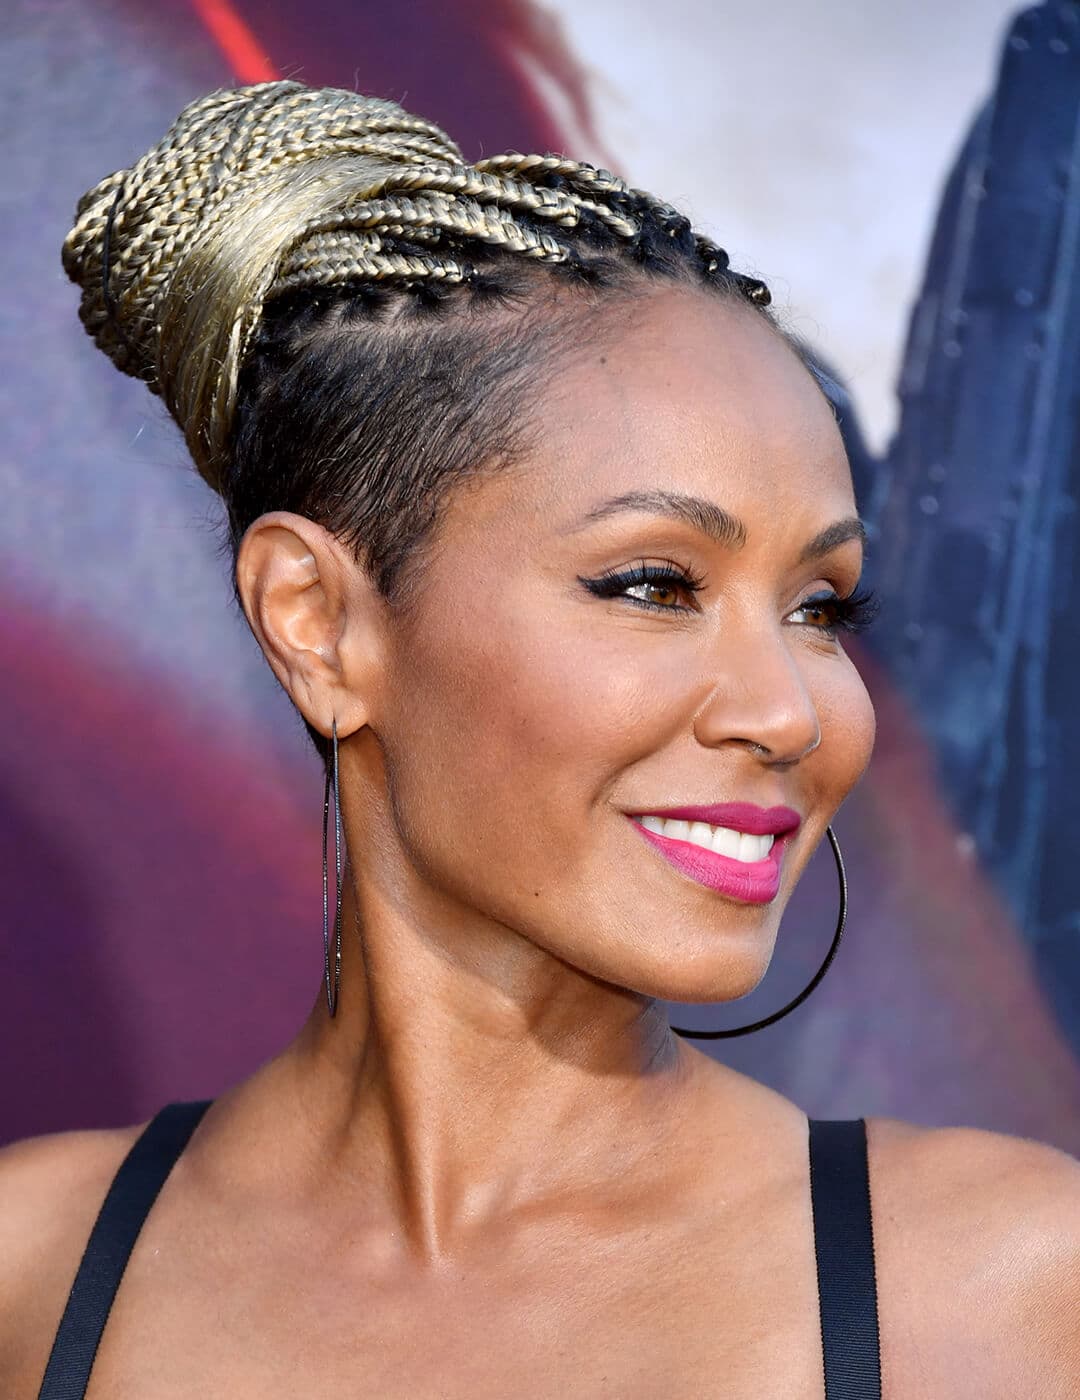 Jada Pinkett Smith rocking a braided bun and undercut hairstyle on the red carpet